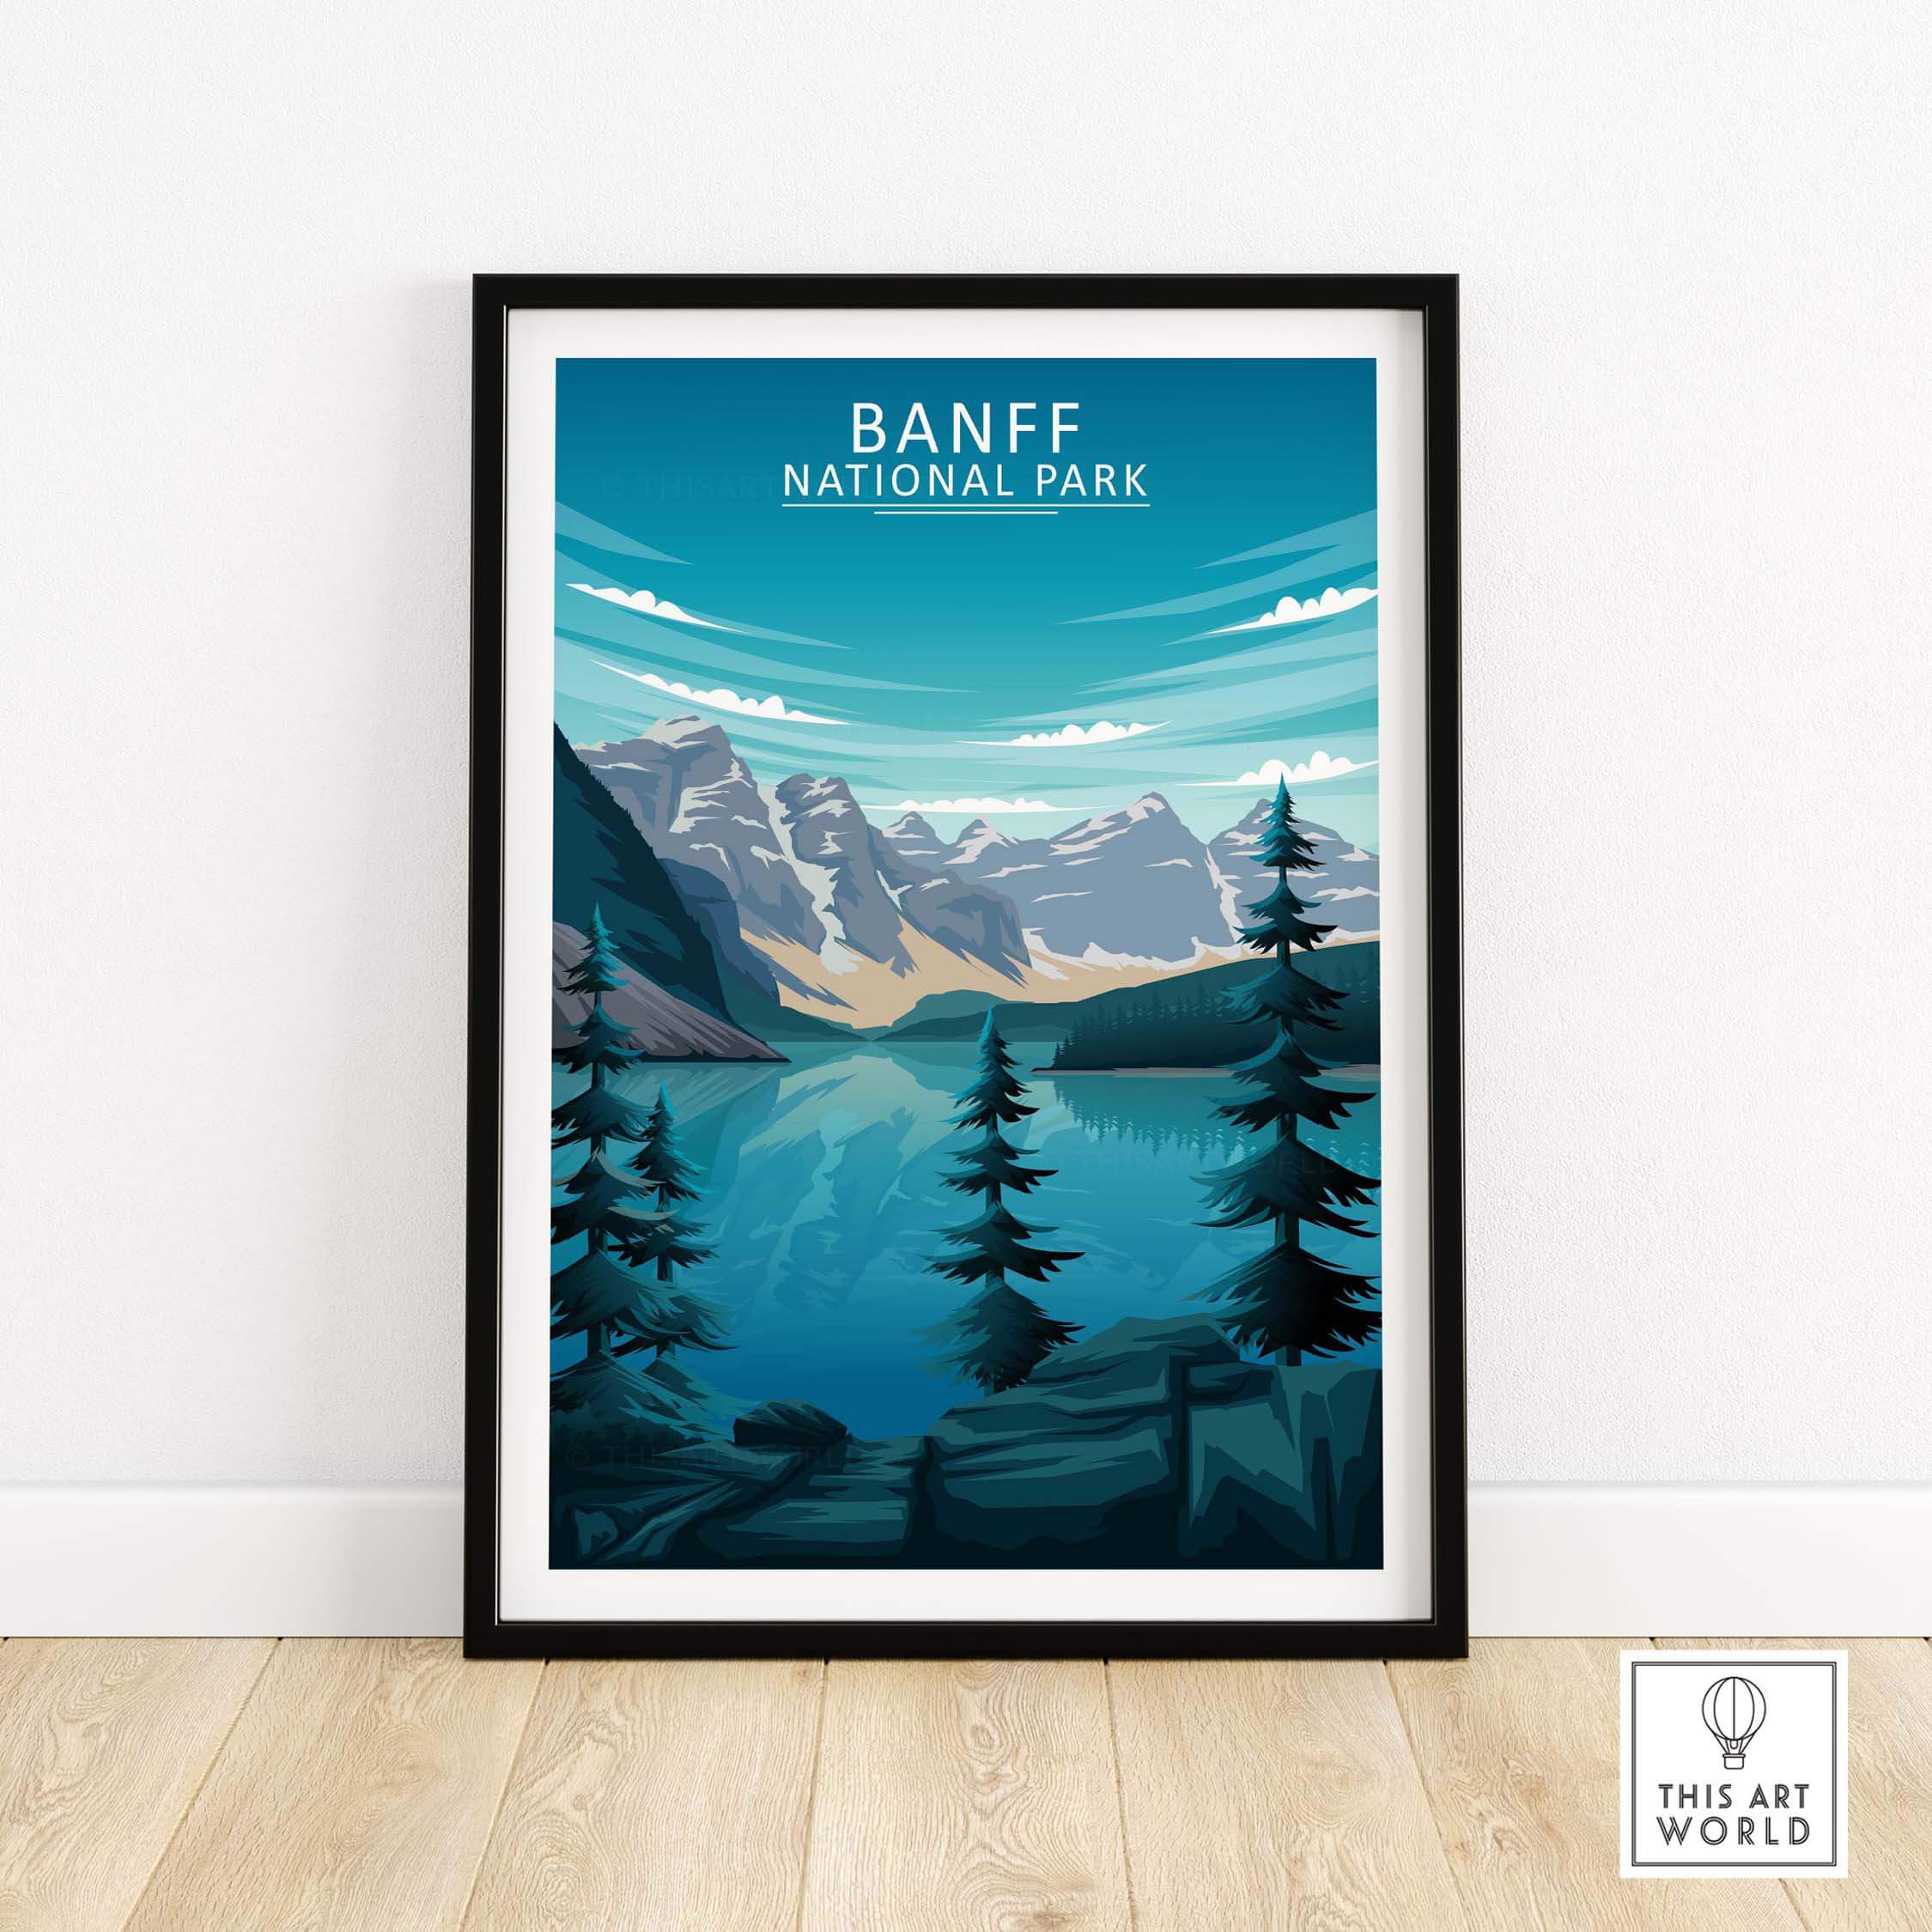 Vintage Style Travel Posters | ThisArtWorld